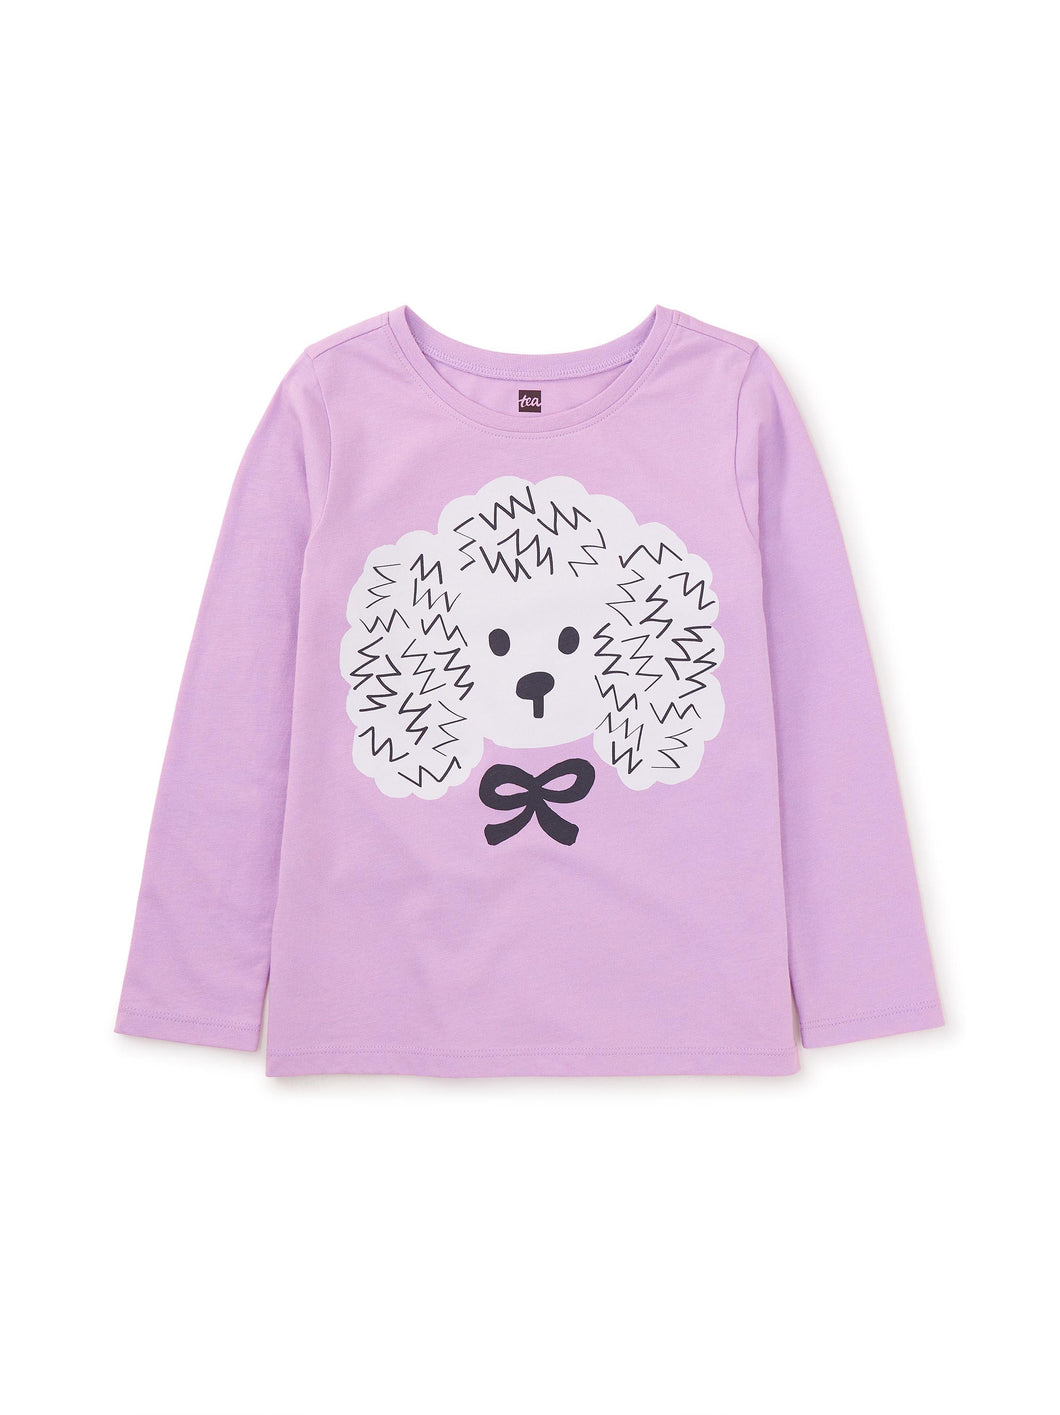 Tea Collection Graphic Baby Tee - Poodle & Bow